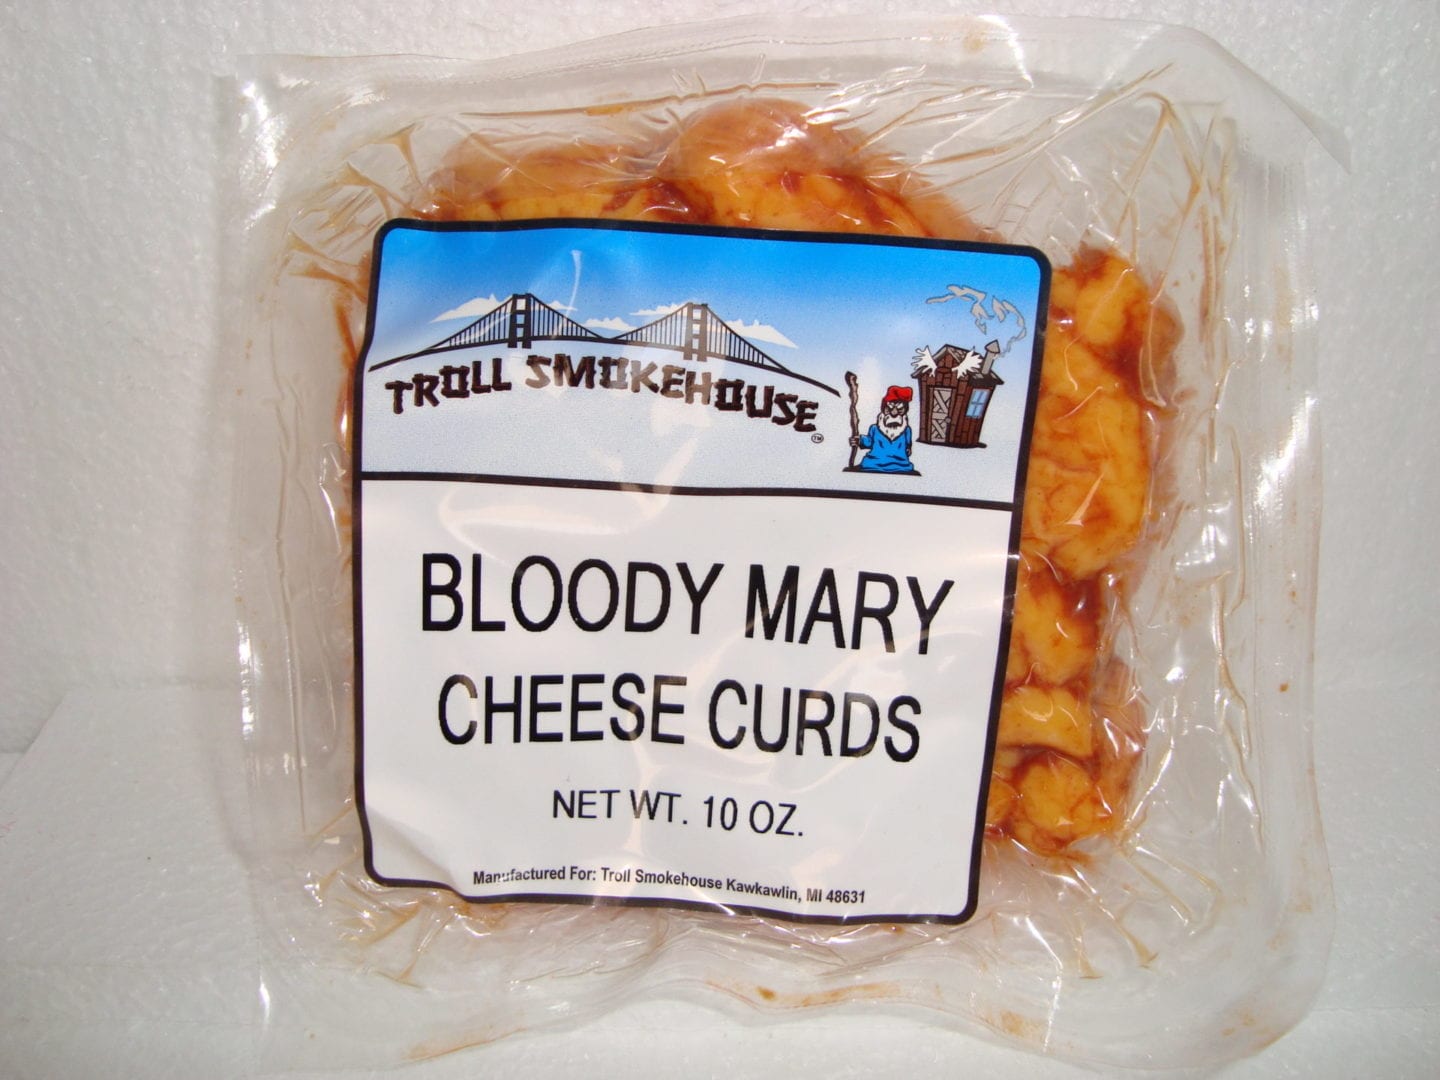 Bloody Mary Cheese Curd 10 oz.